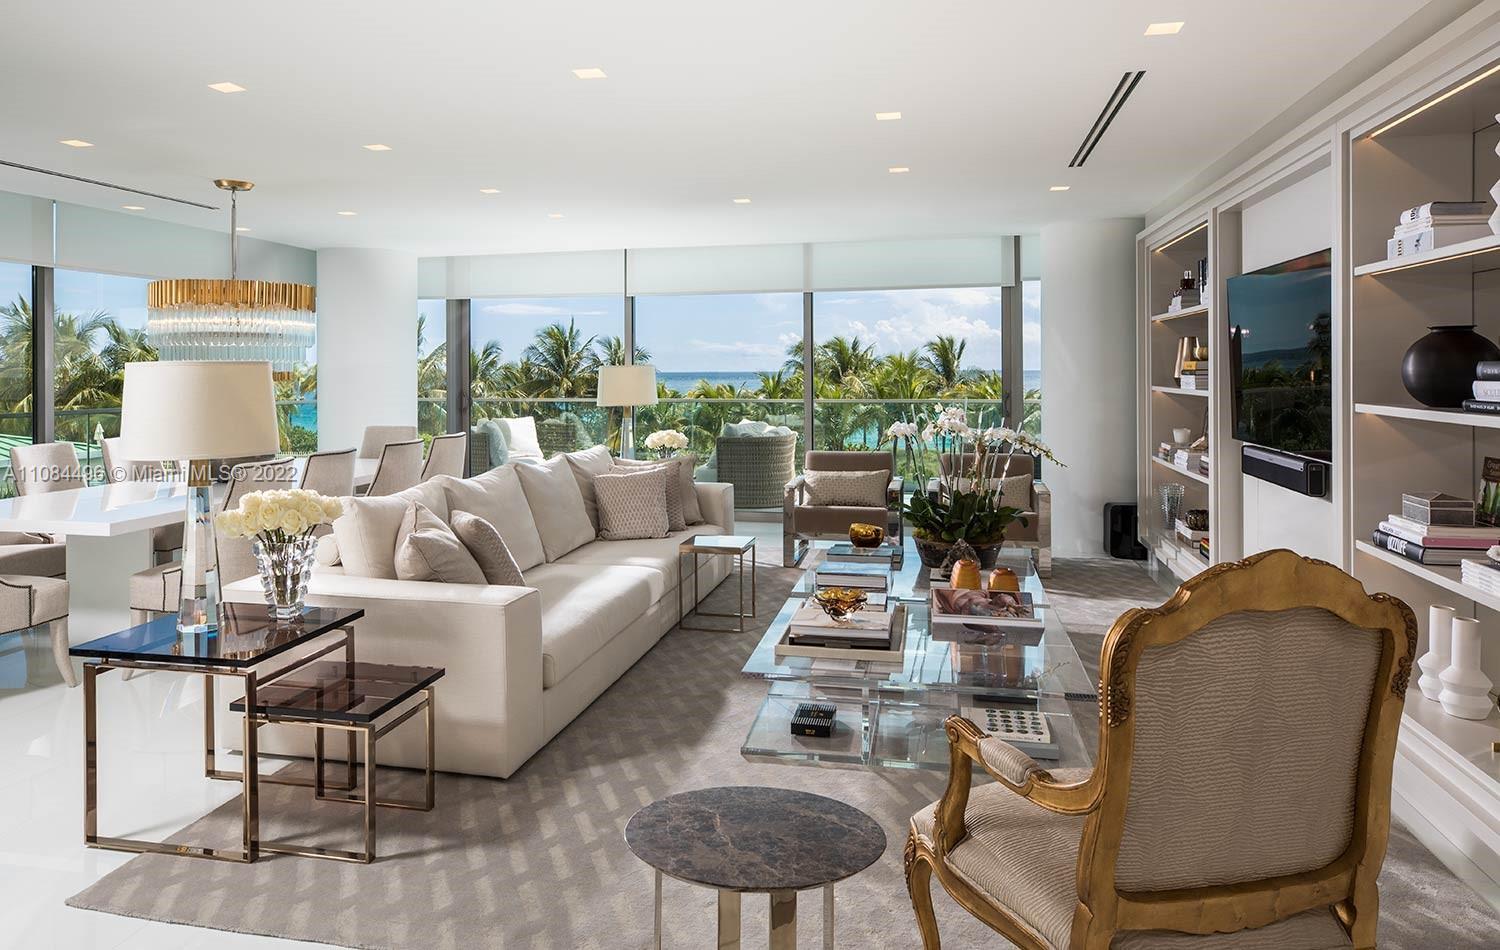 Oceana Bal Harbour  2 bedroom 2 1/2 baths fully finished corner unit and professionally decorated by